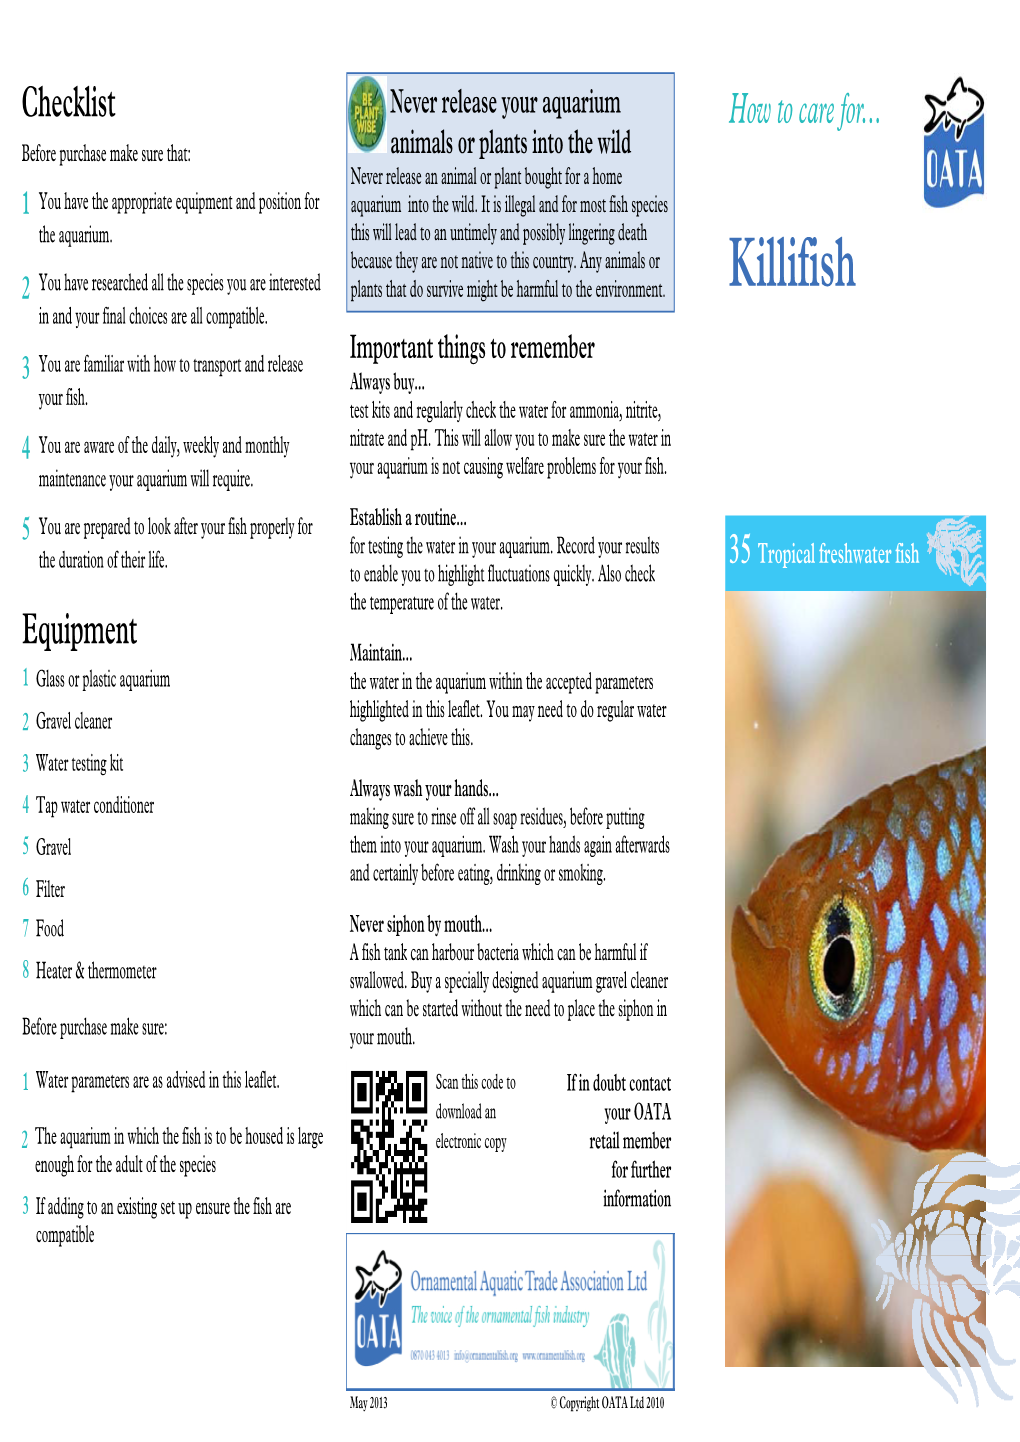 Killifish 2 in and Your Final Choices Are All Compatible